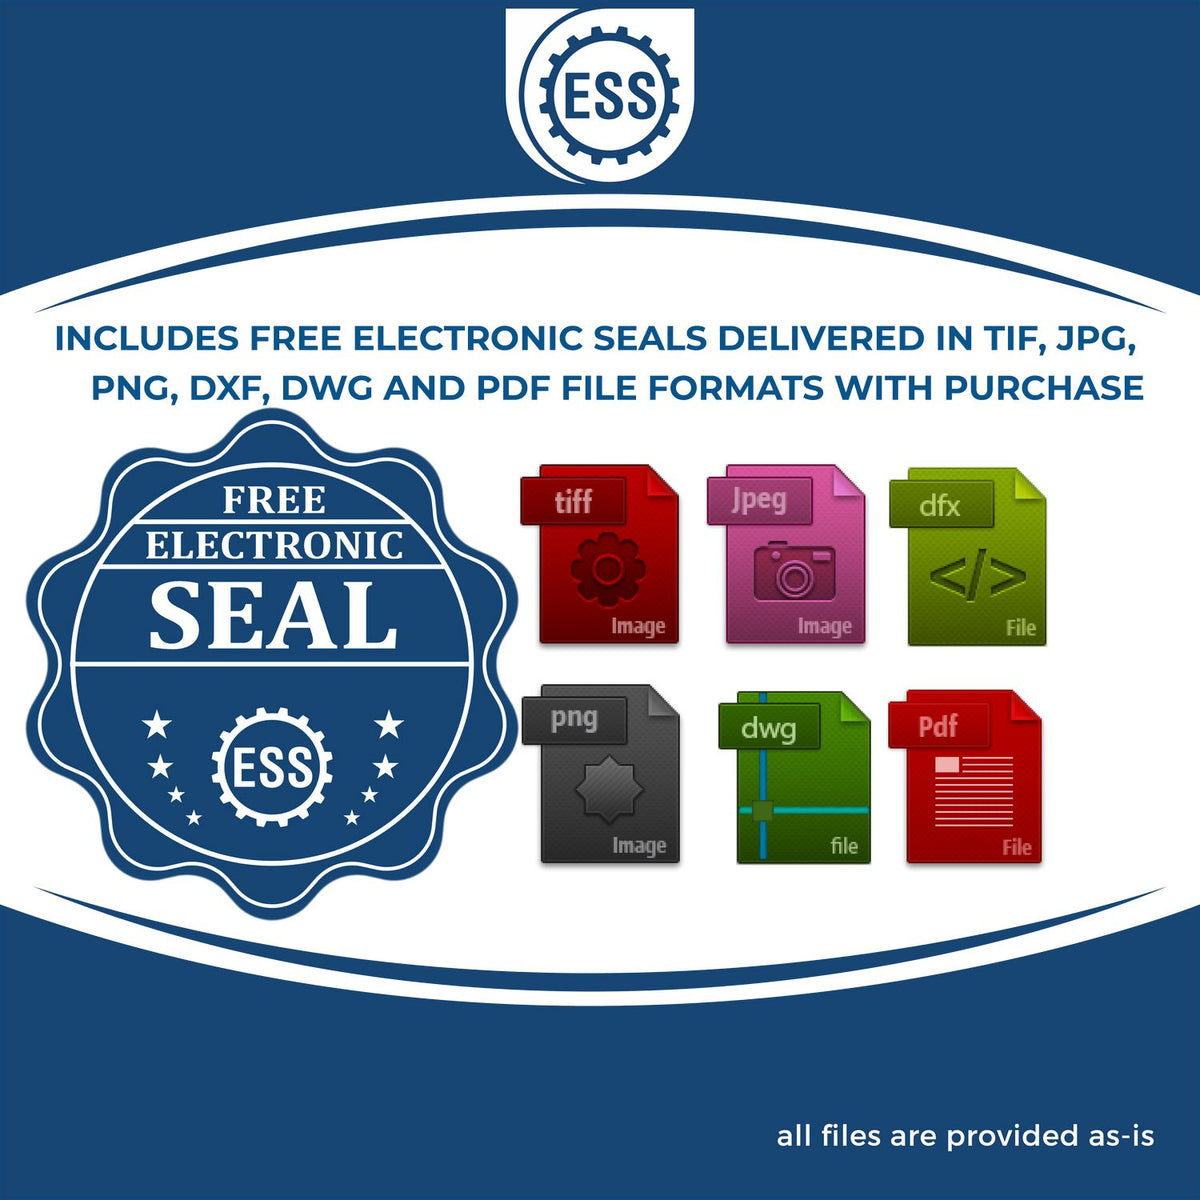 An infographic for the free electronic seal for the Extended Long Reach Arizona Surveyor Embosser illustrating the different file type icons such as DXF, DWG, TIF, JPG and PNG.